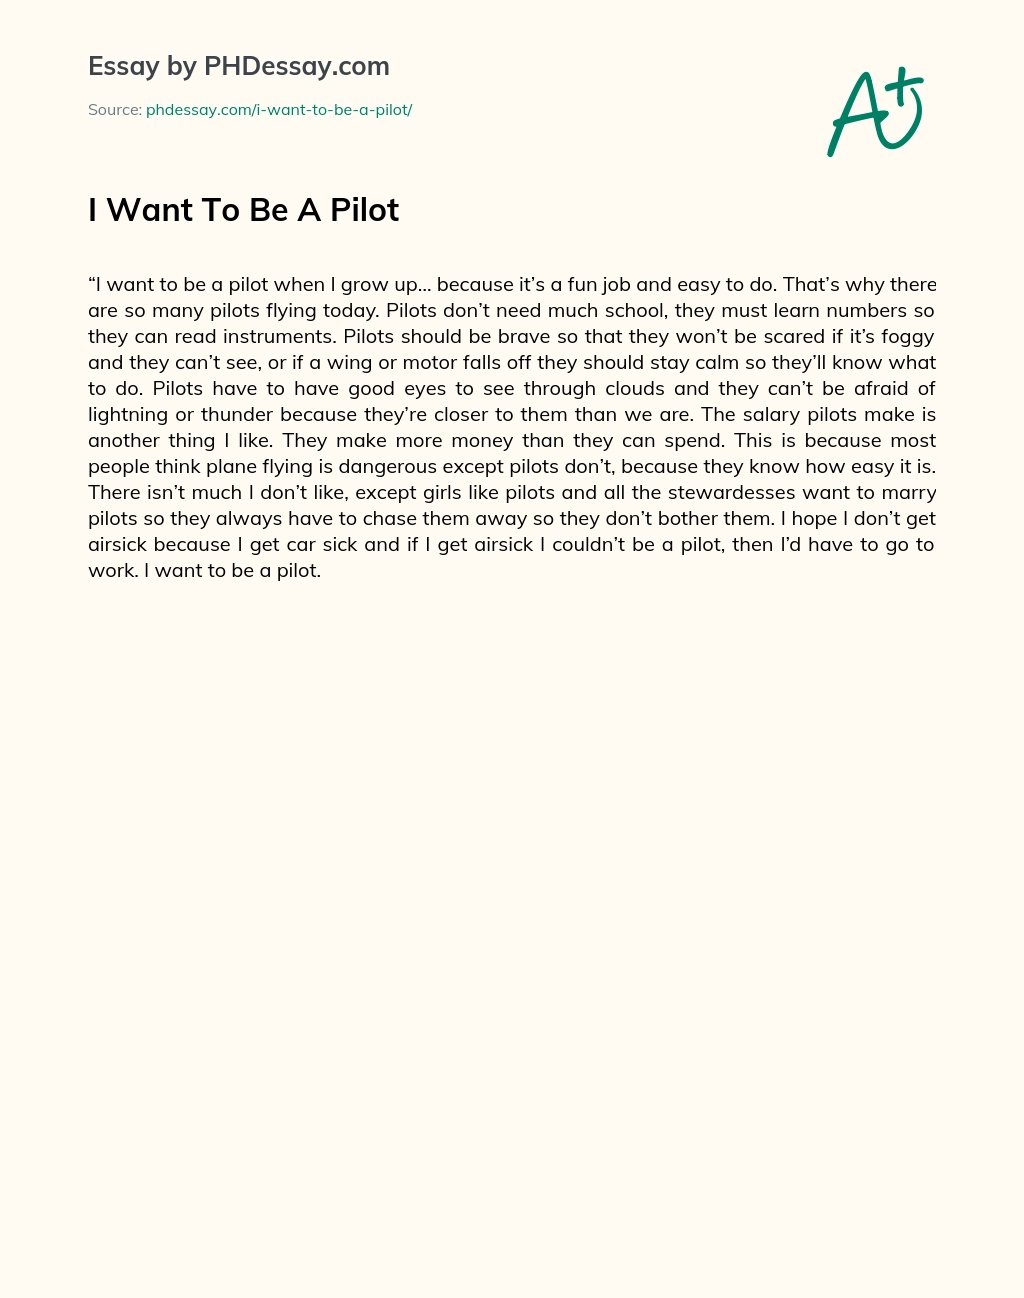 I Want To Be A Pilot essay